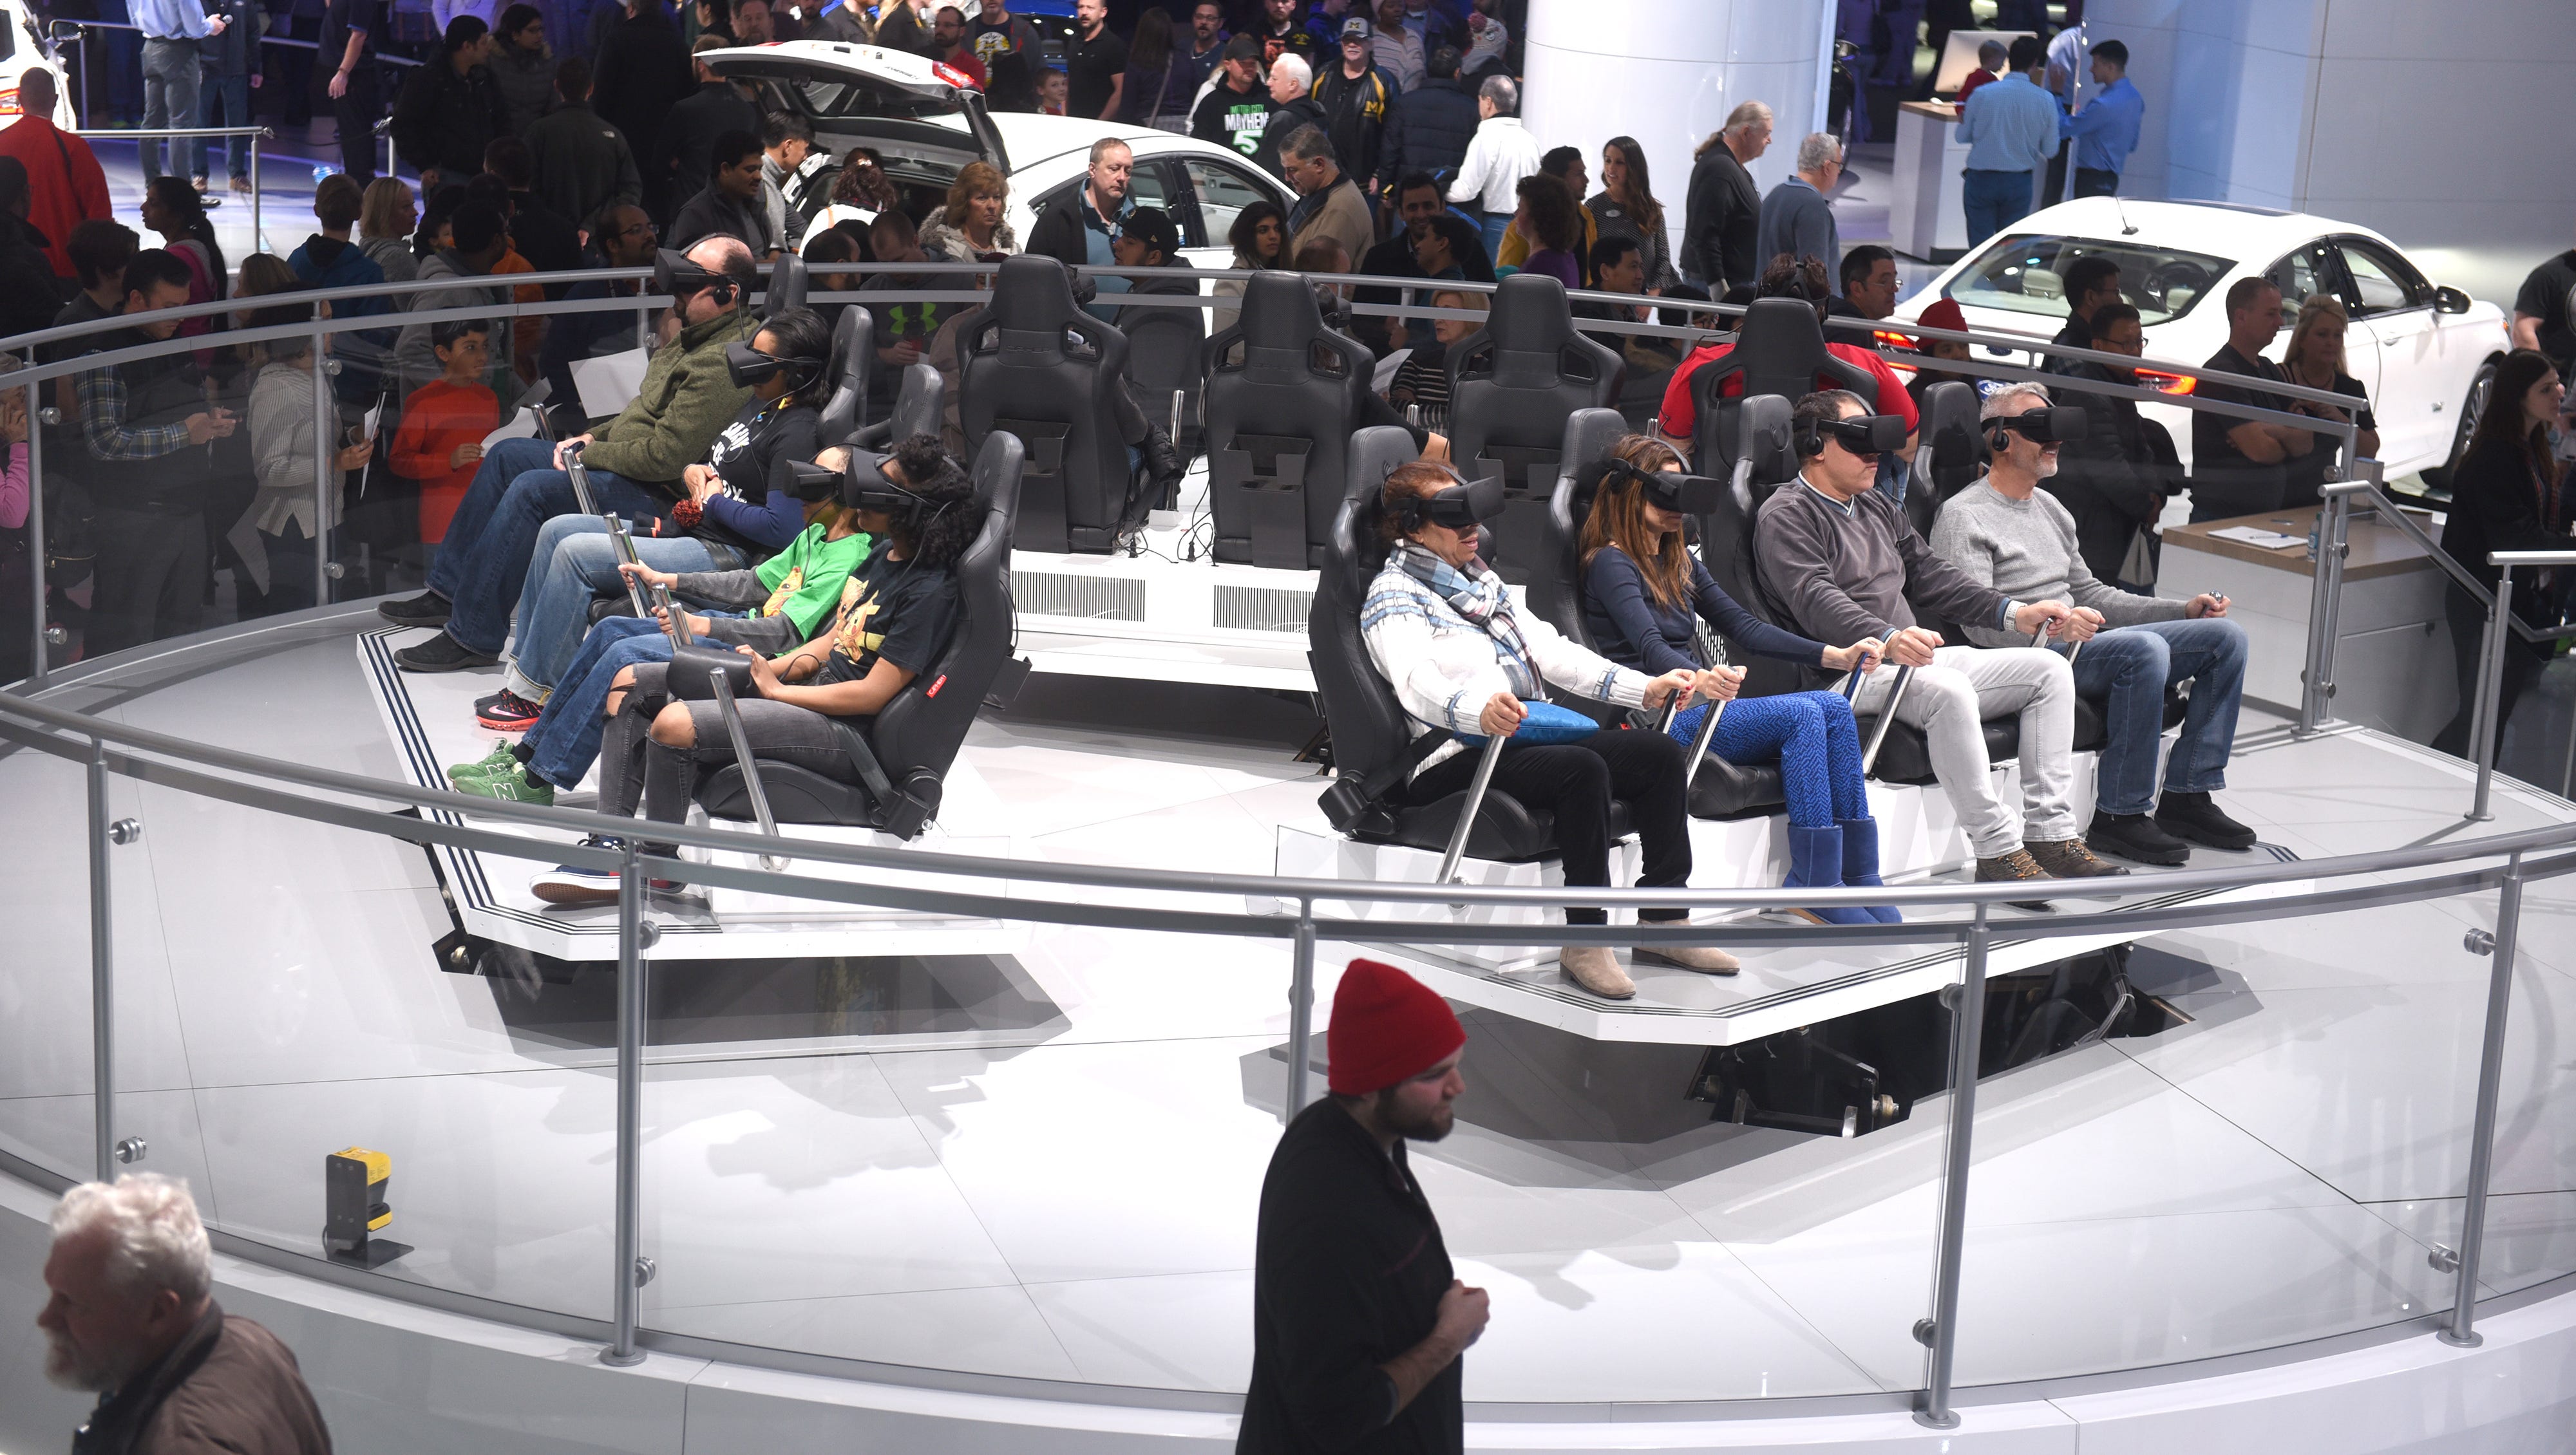 People fill Cobo Center at Ford Motor Company's Future Mobility VR Experience on Saturday January 20, 2018 for the first public day for the North American International Auto Show